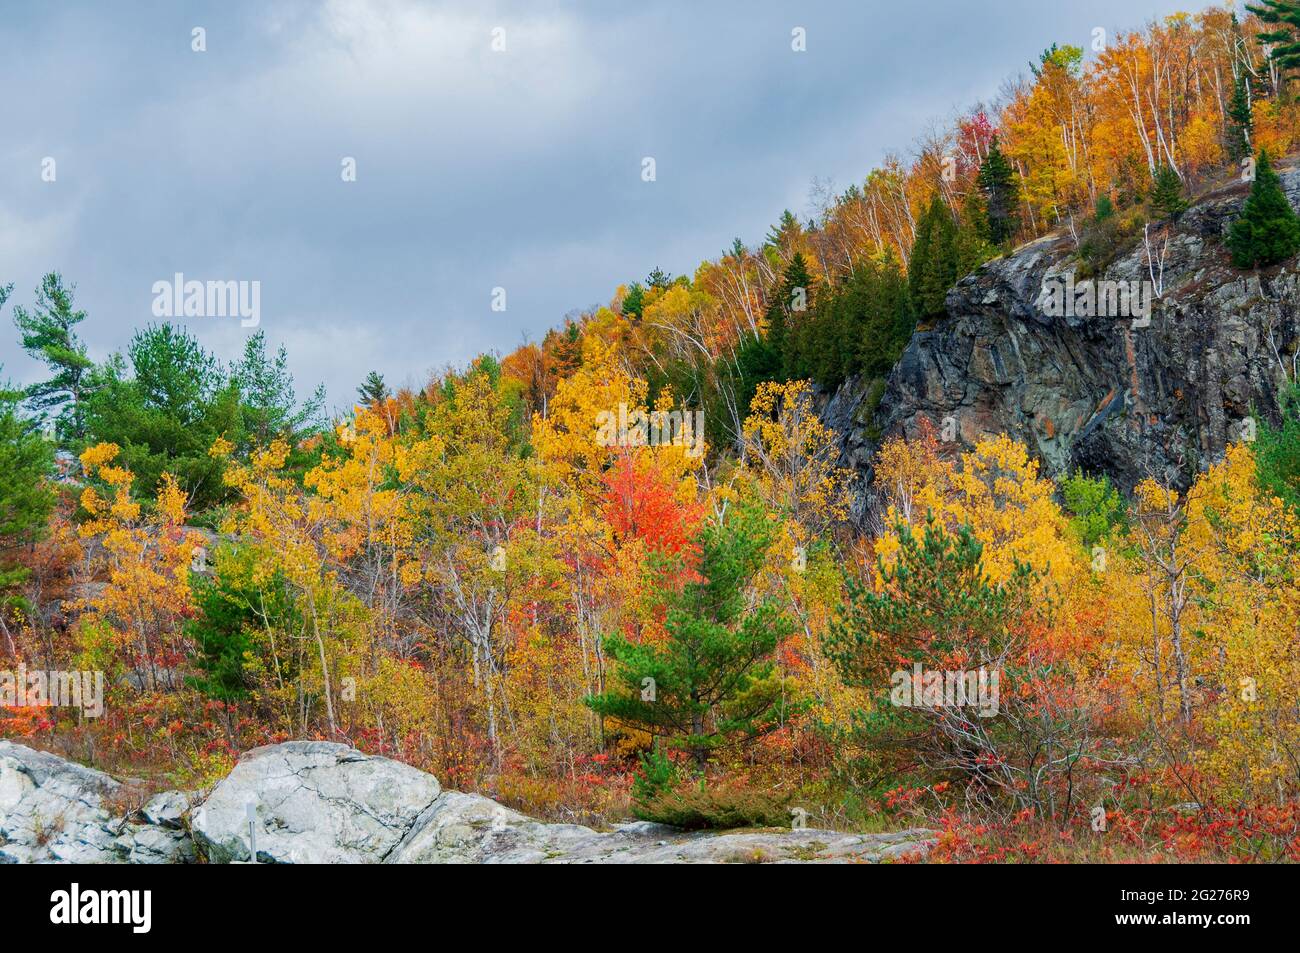 Scenic view of rocks, a rock cliff and autumn foliage in lower New York, USA Stock Photo